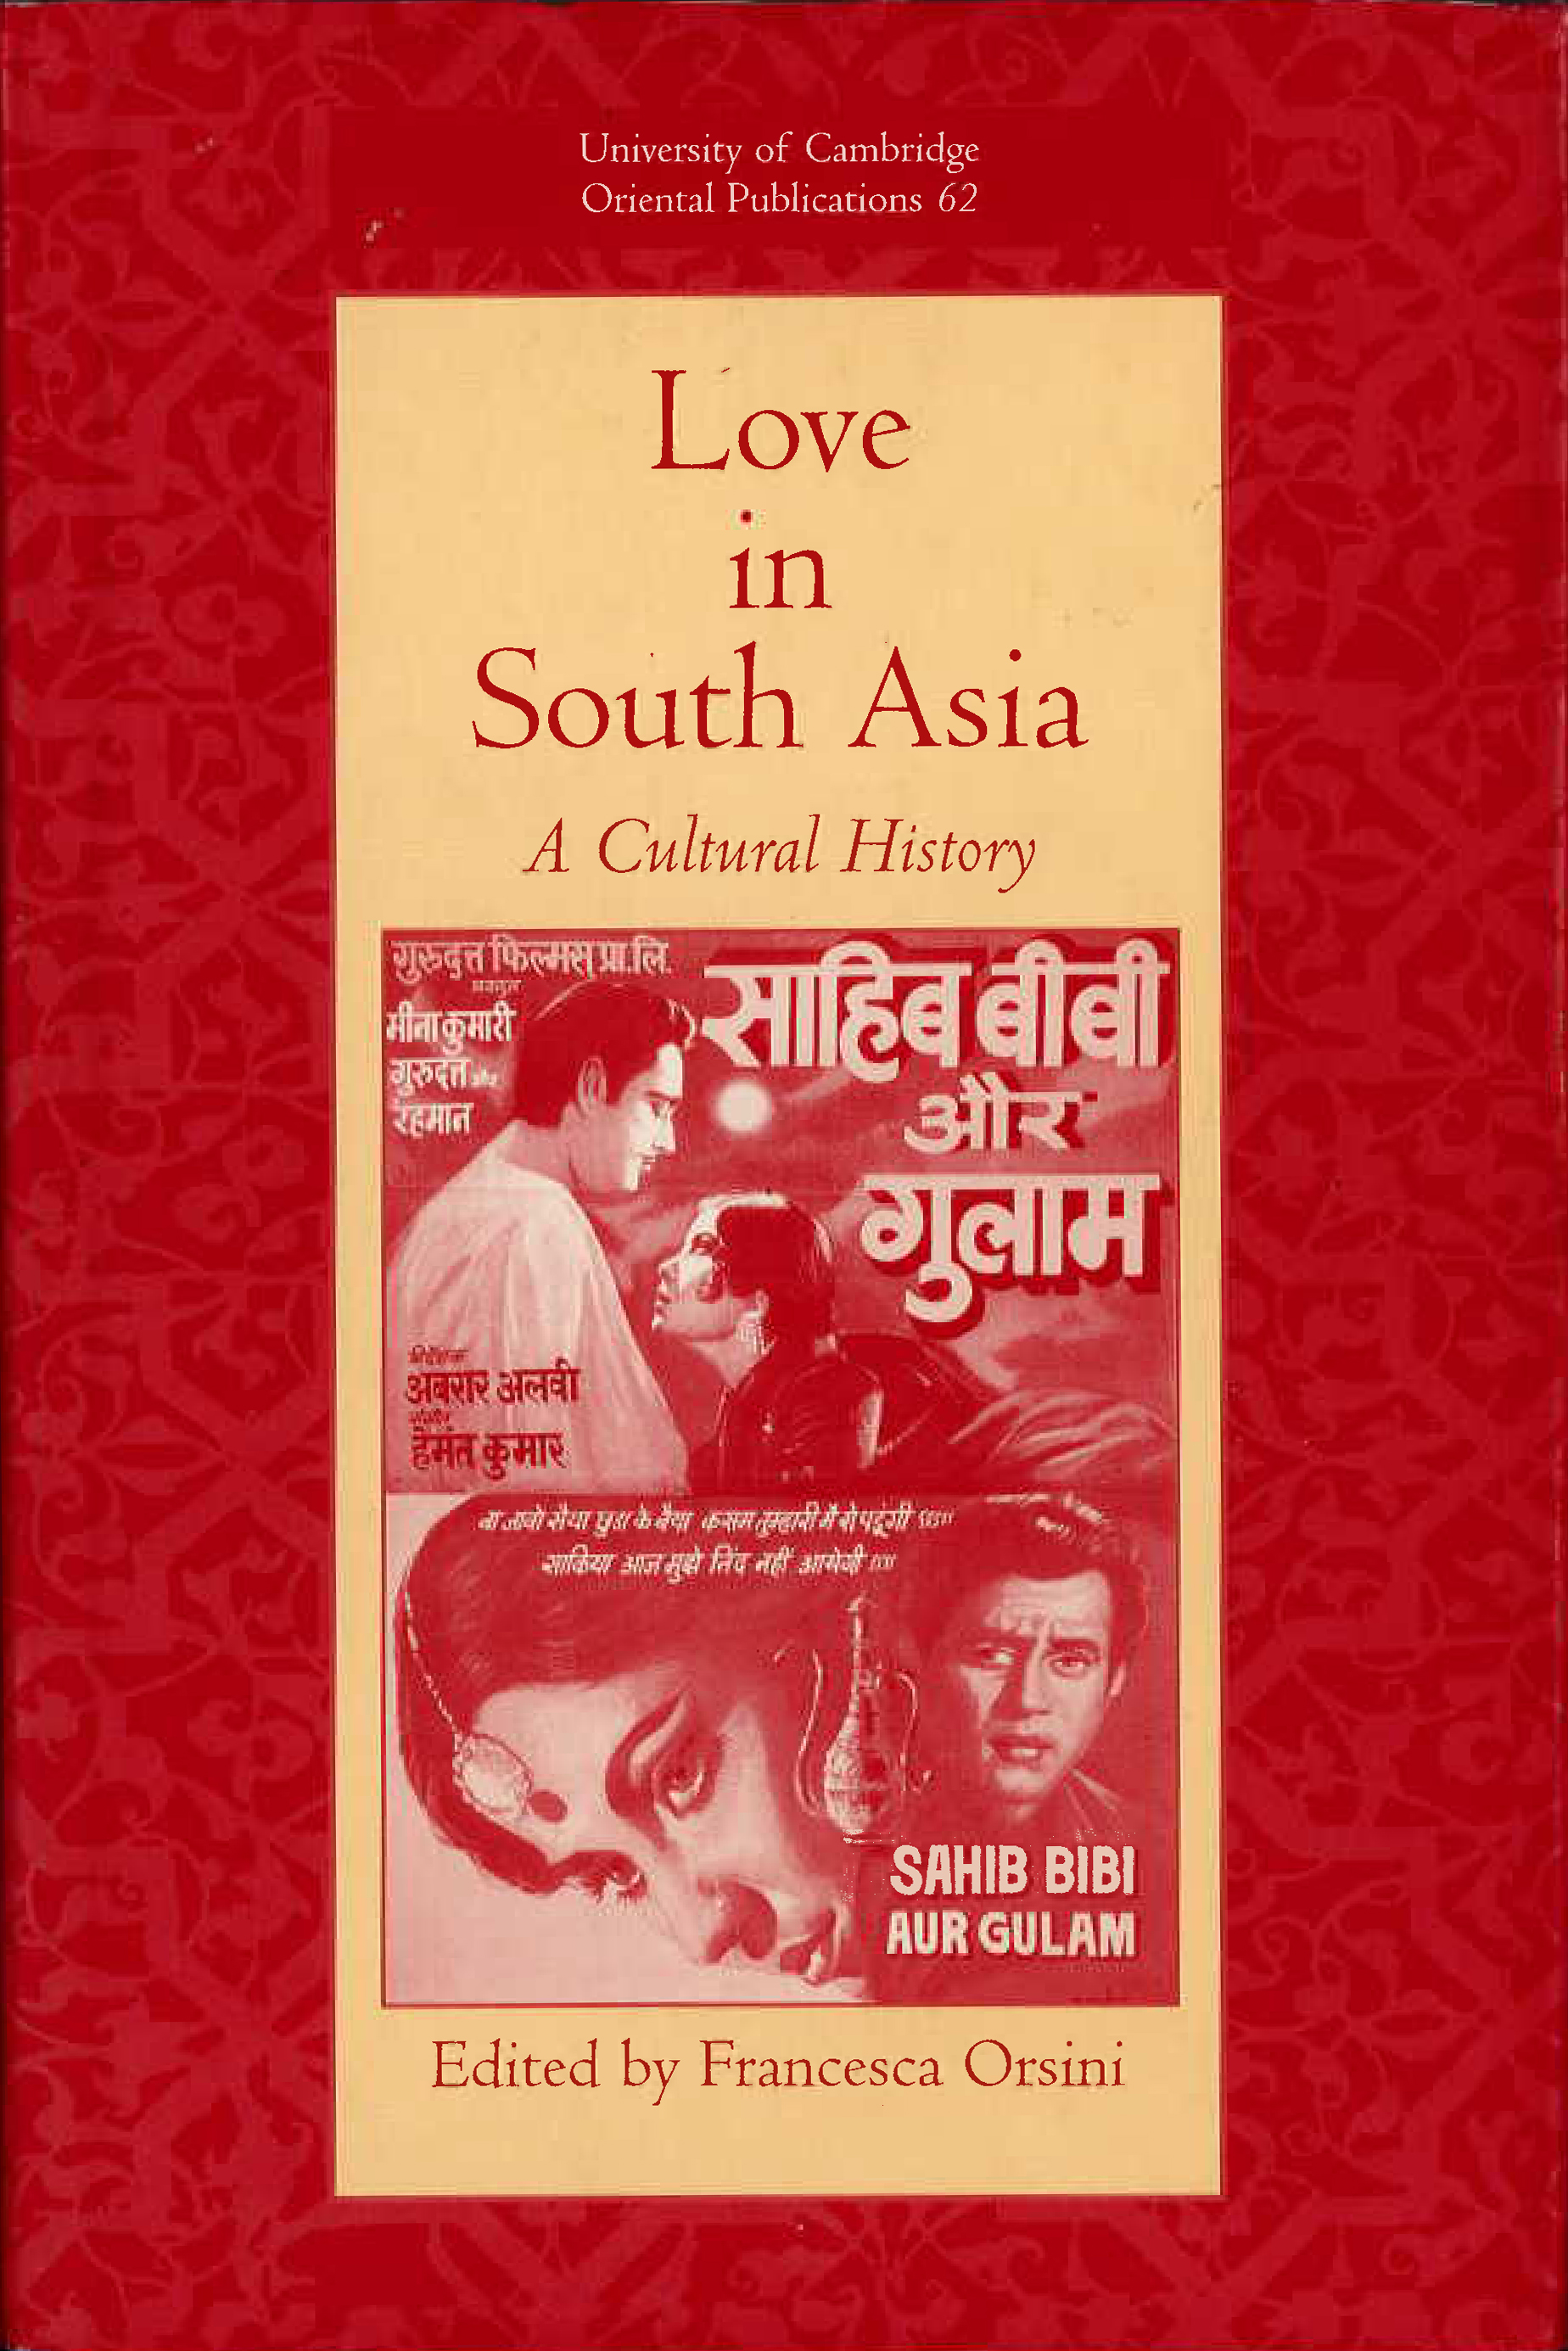 Love in South Asia: A Cultural History